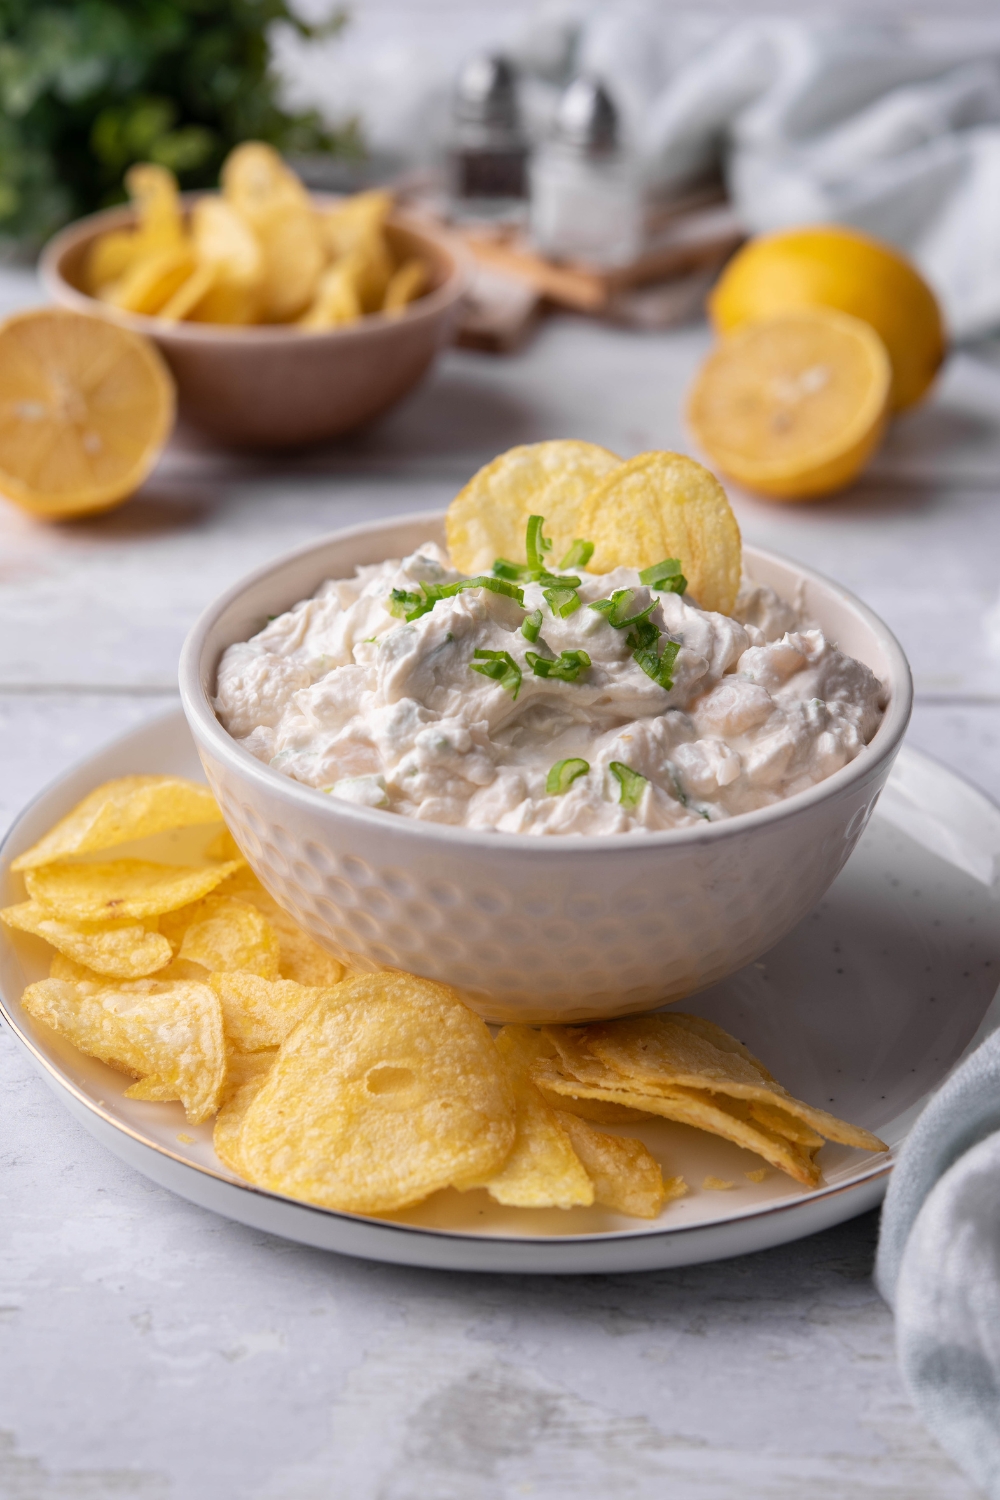 A small dip dish with clam dip in it being served on a plate with potato chips.